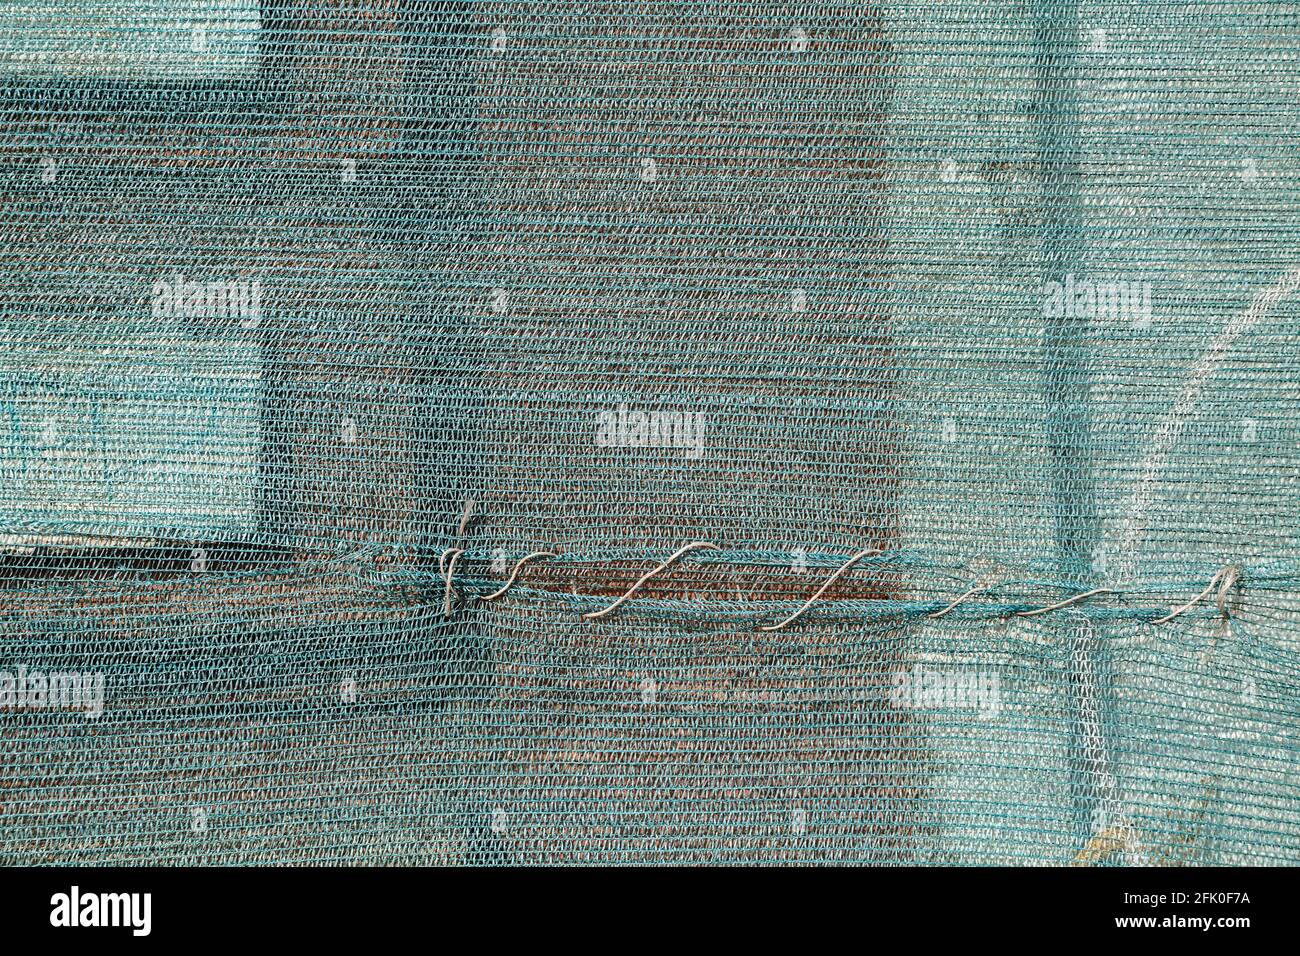 Plastic blue grid on the abandoned house facade Stock Photo